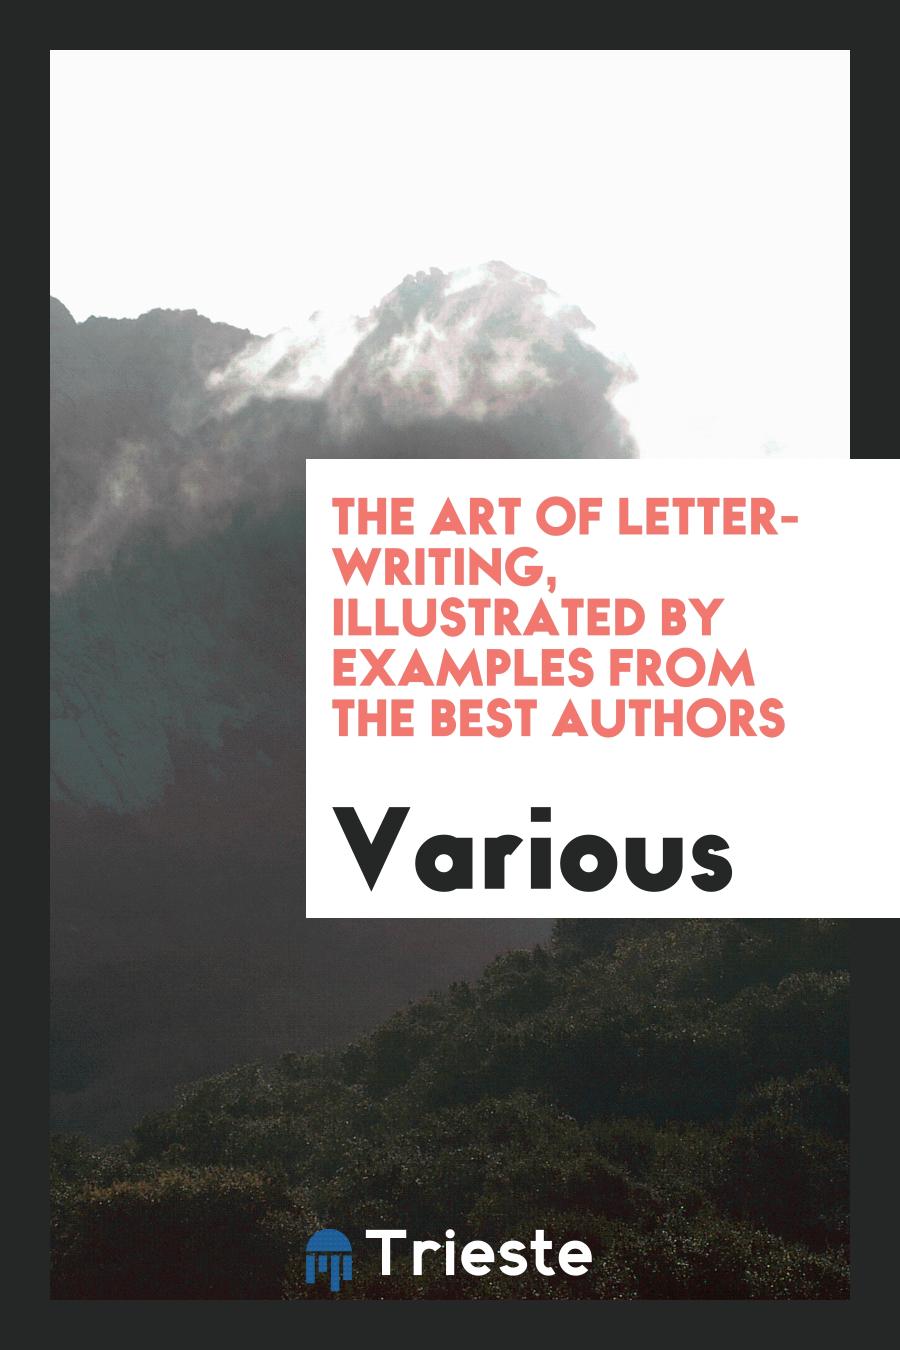 The Art of Letter-Writing, Illustrated by Examples from the Best Authors